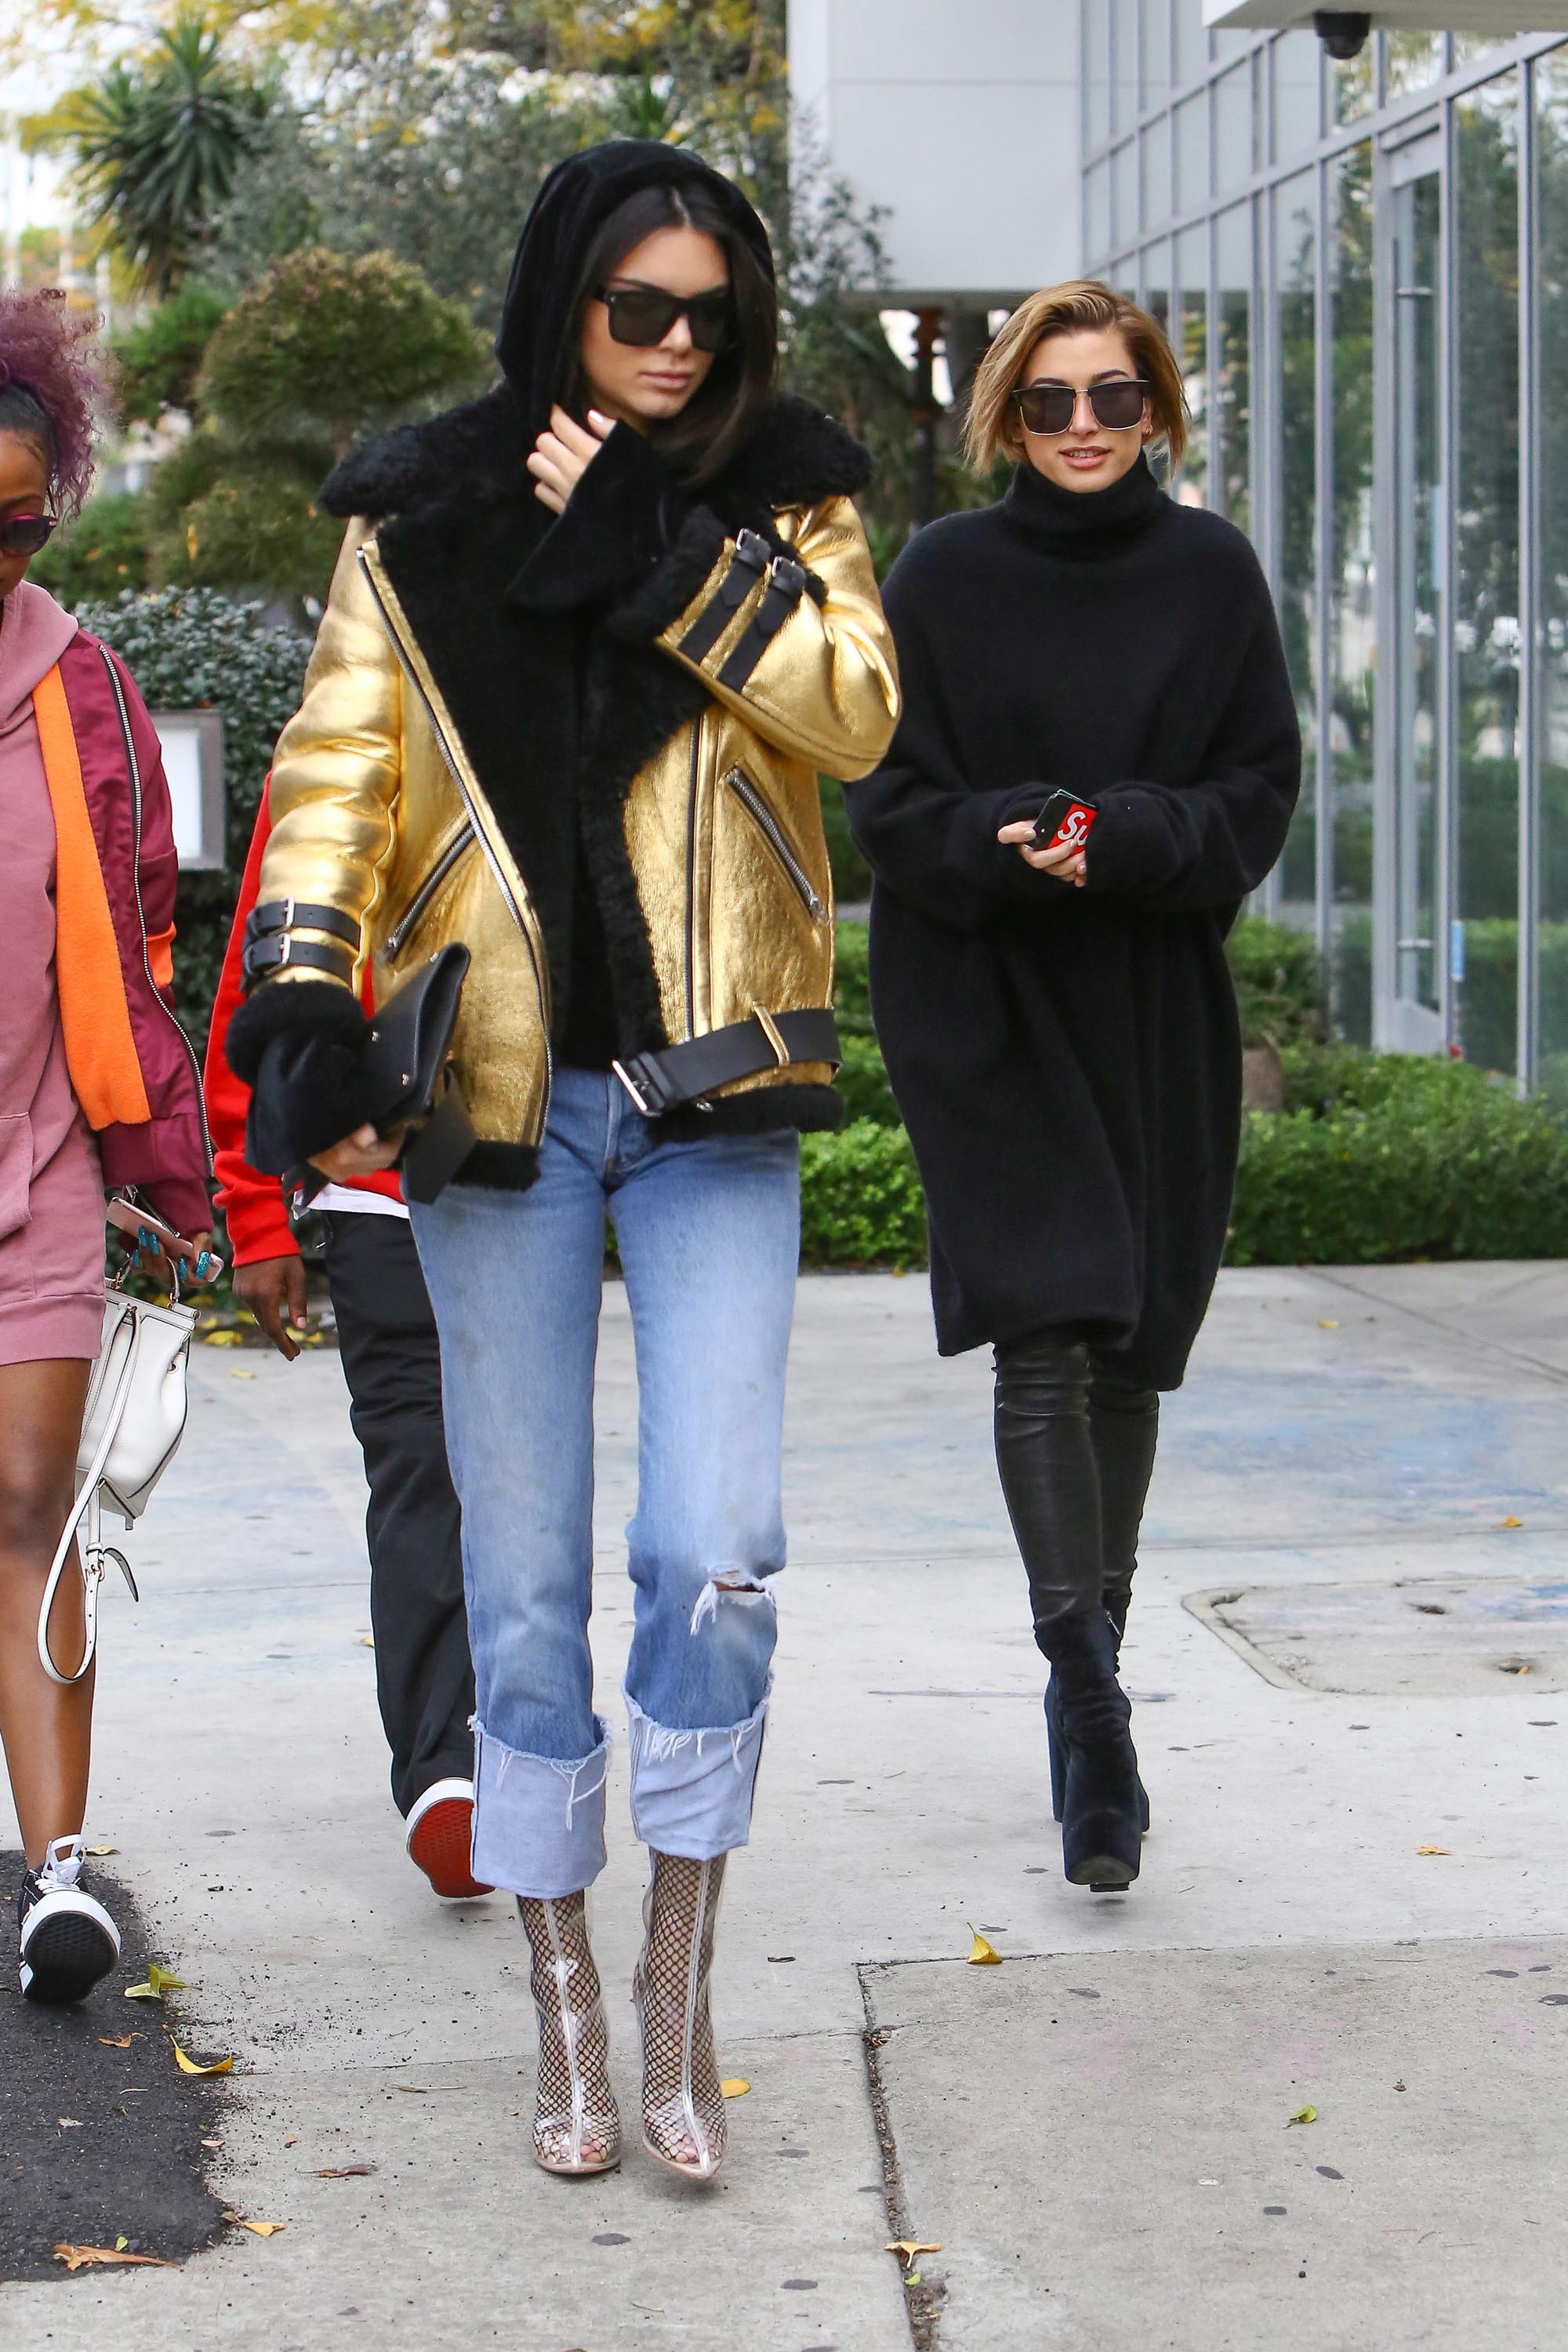 Hailey Baldwin & Kendall Jenner shopping in West Hollywood